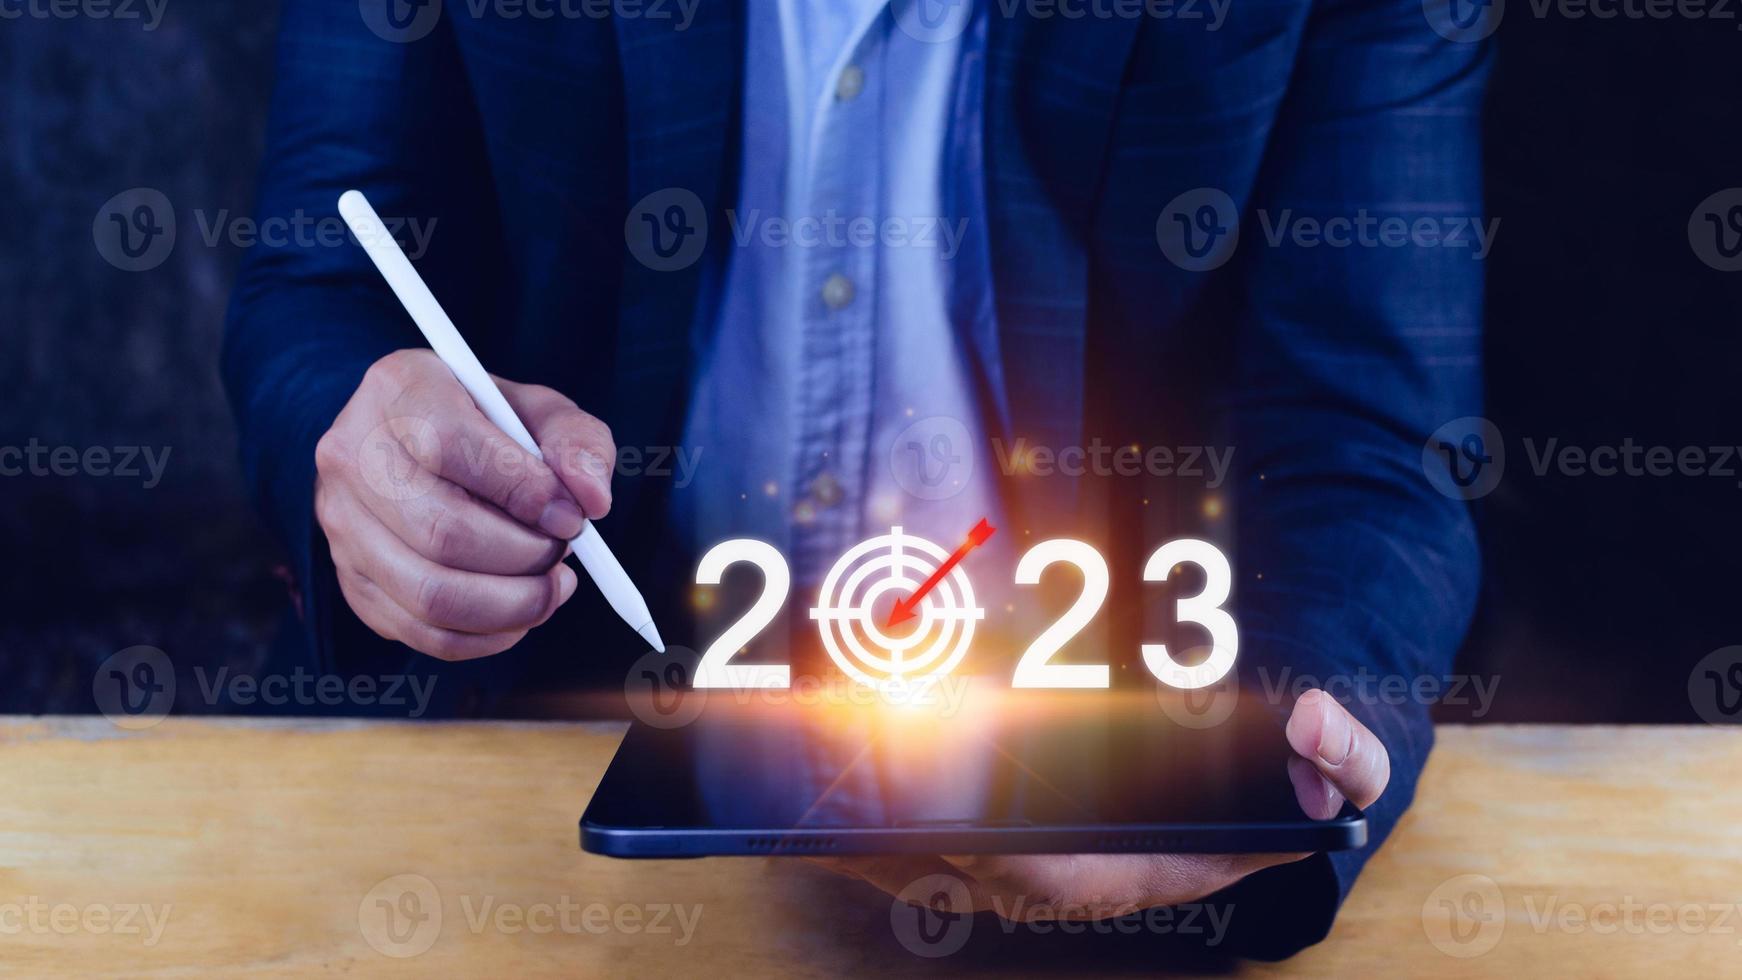 Business target and goal 2023 icon, hand pointing holding 2023 virtual screen, Start new year 2023 with a goal plan, action plan, strategy, new year business vision. photo